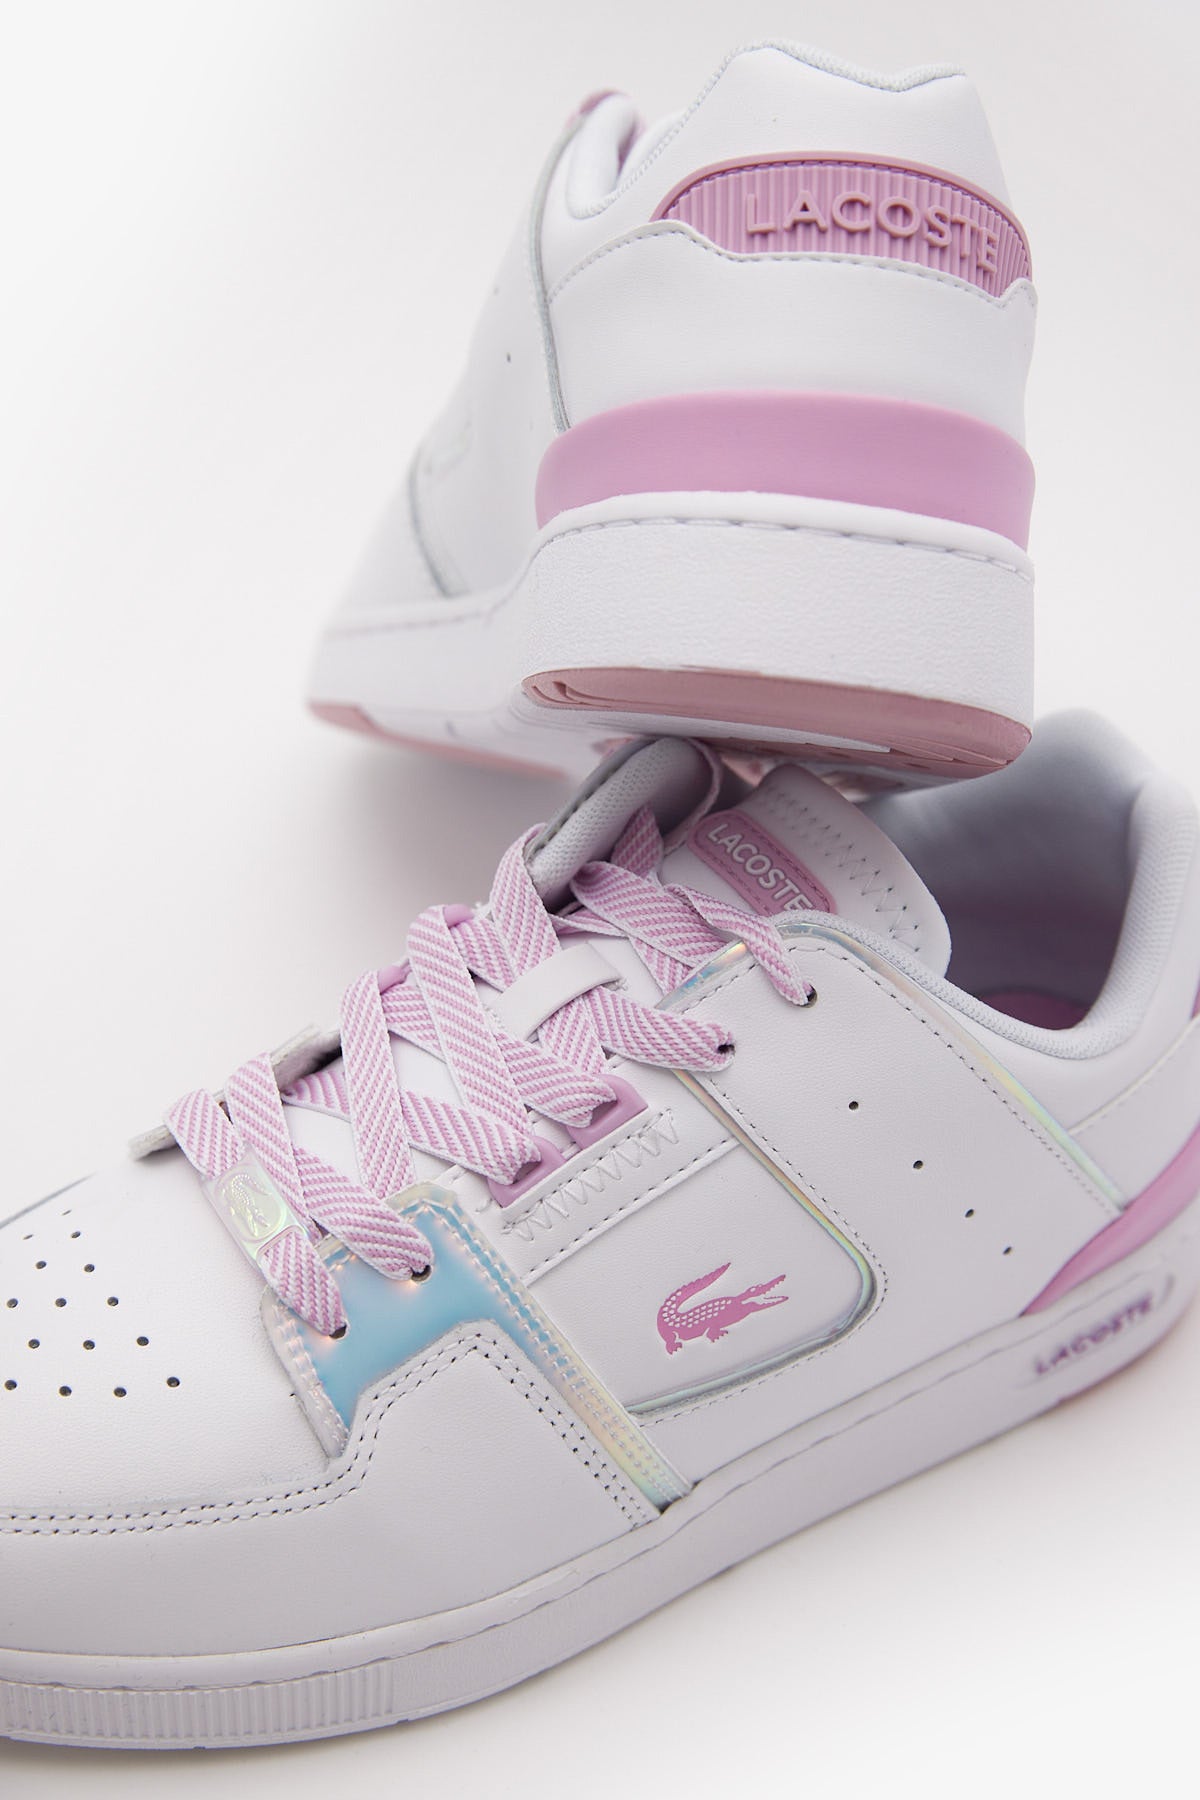 Lacoste Court Cage 222 5 SFA White / Pink